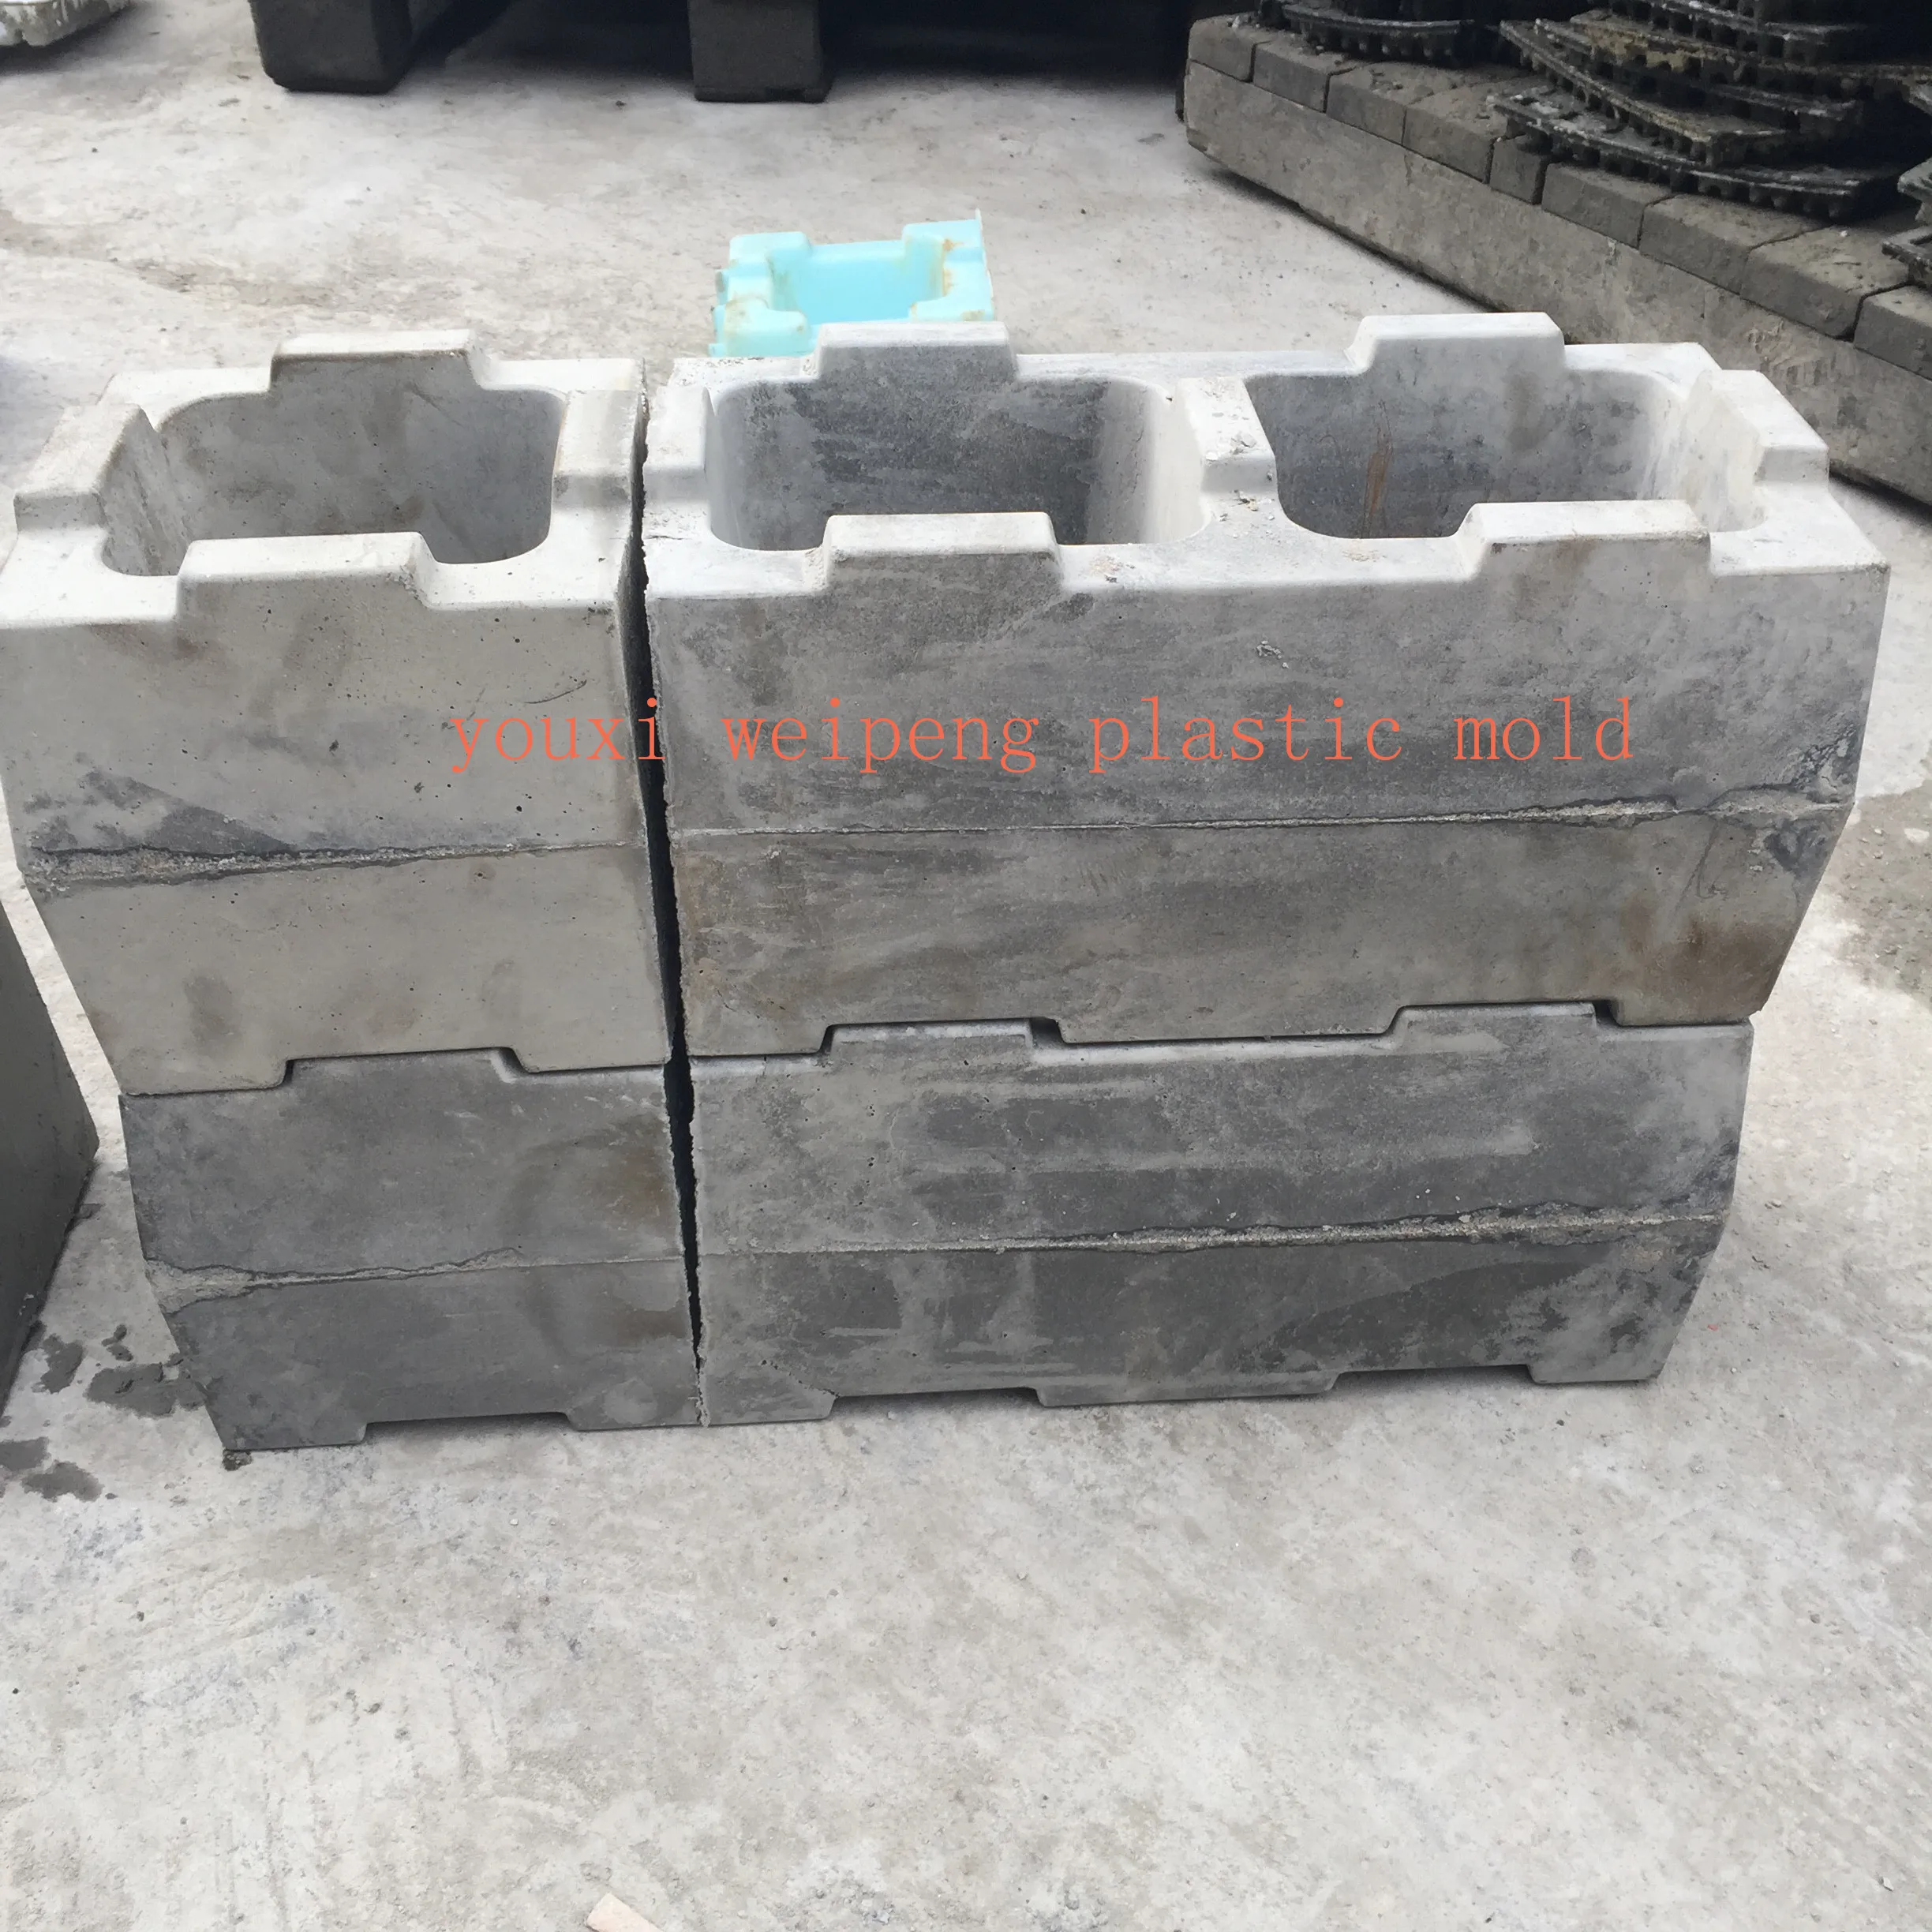 400*200*200 Concrete Interlocking Block Mold For South Africa - Buy